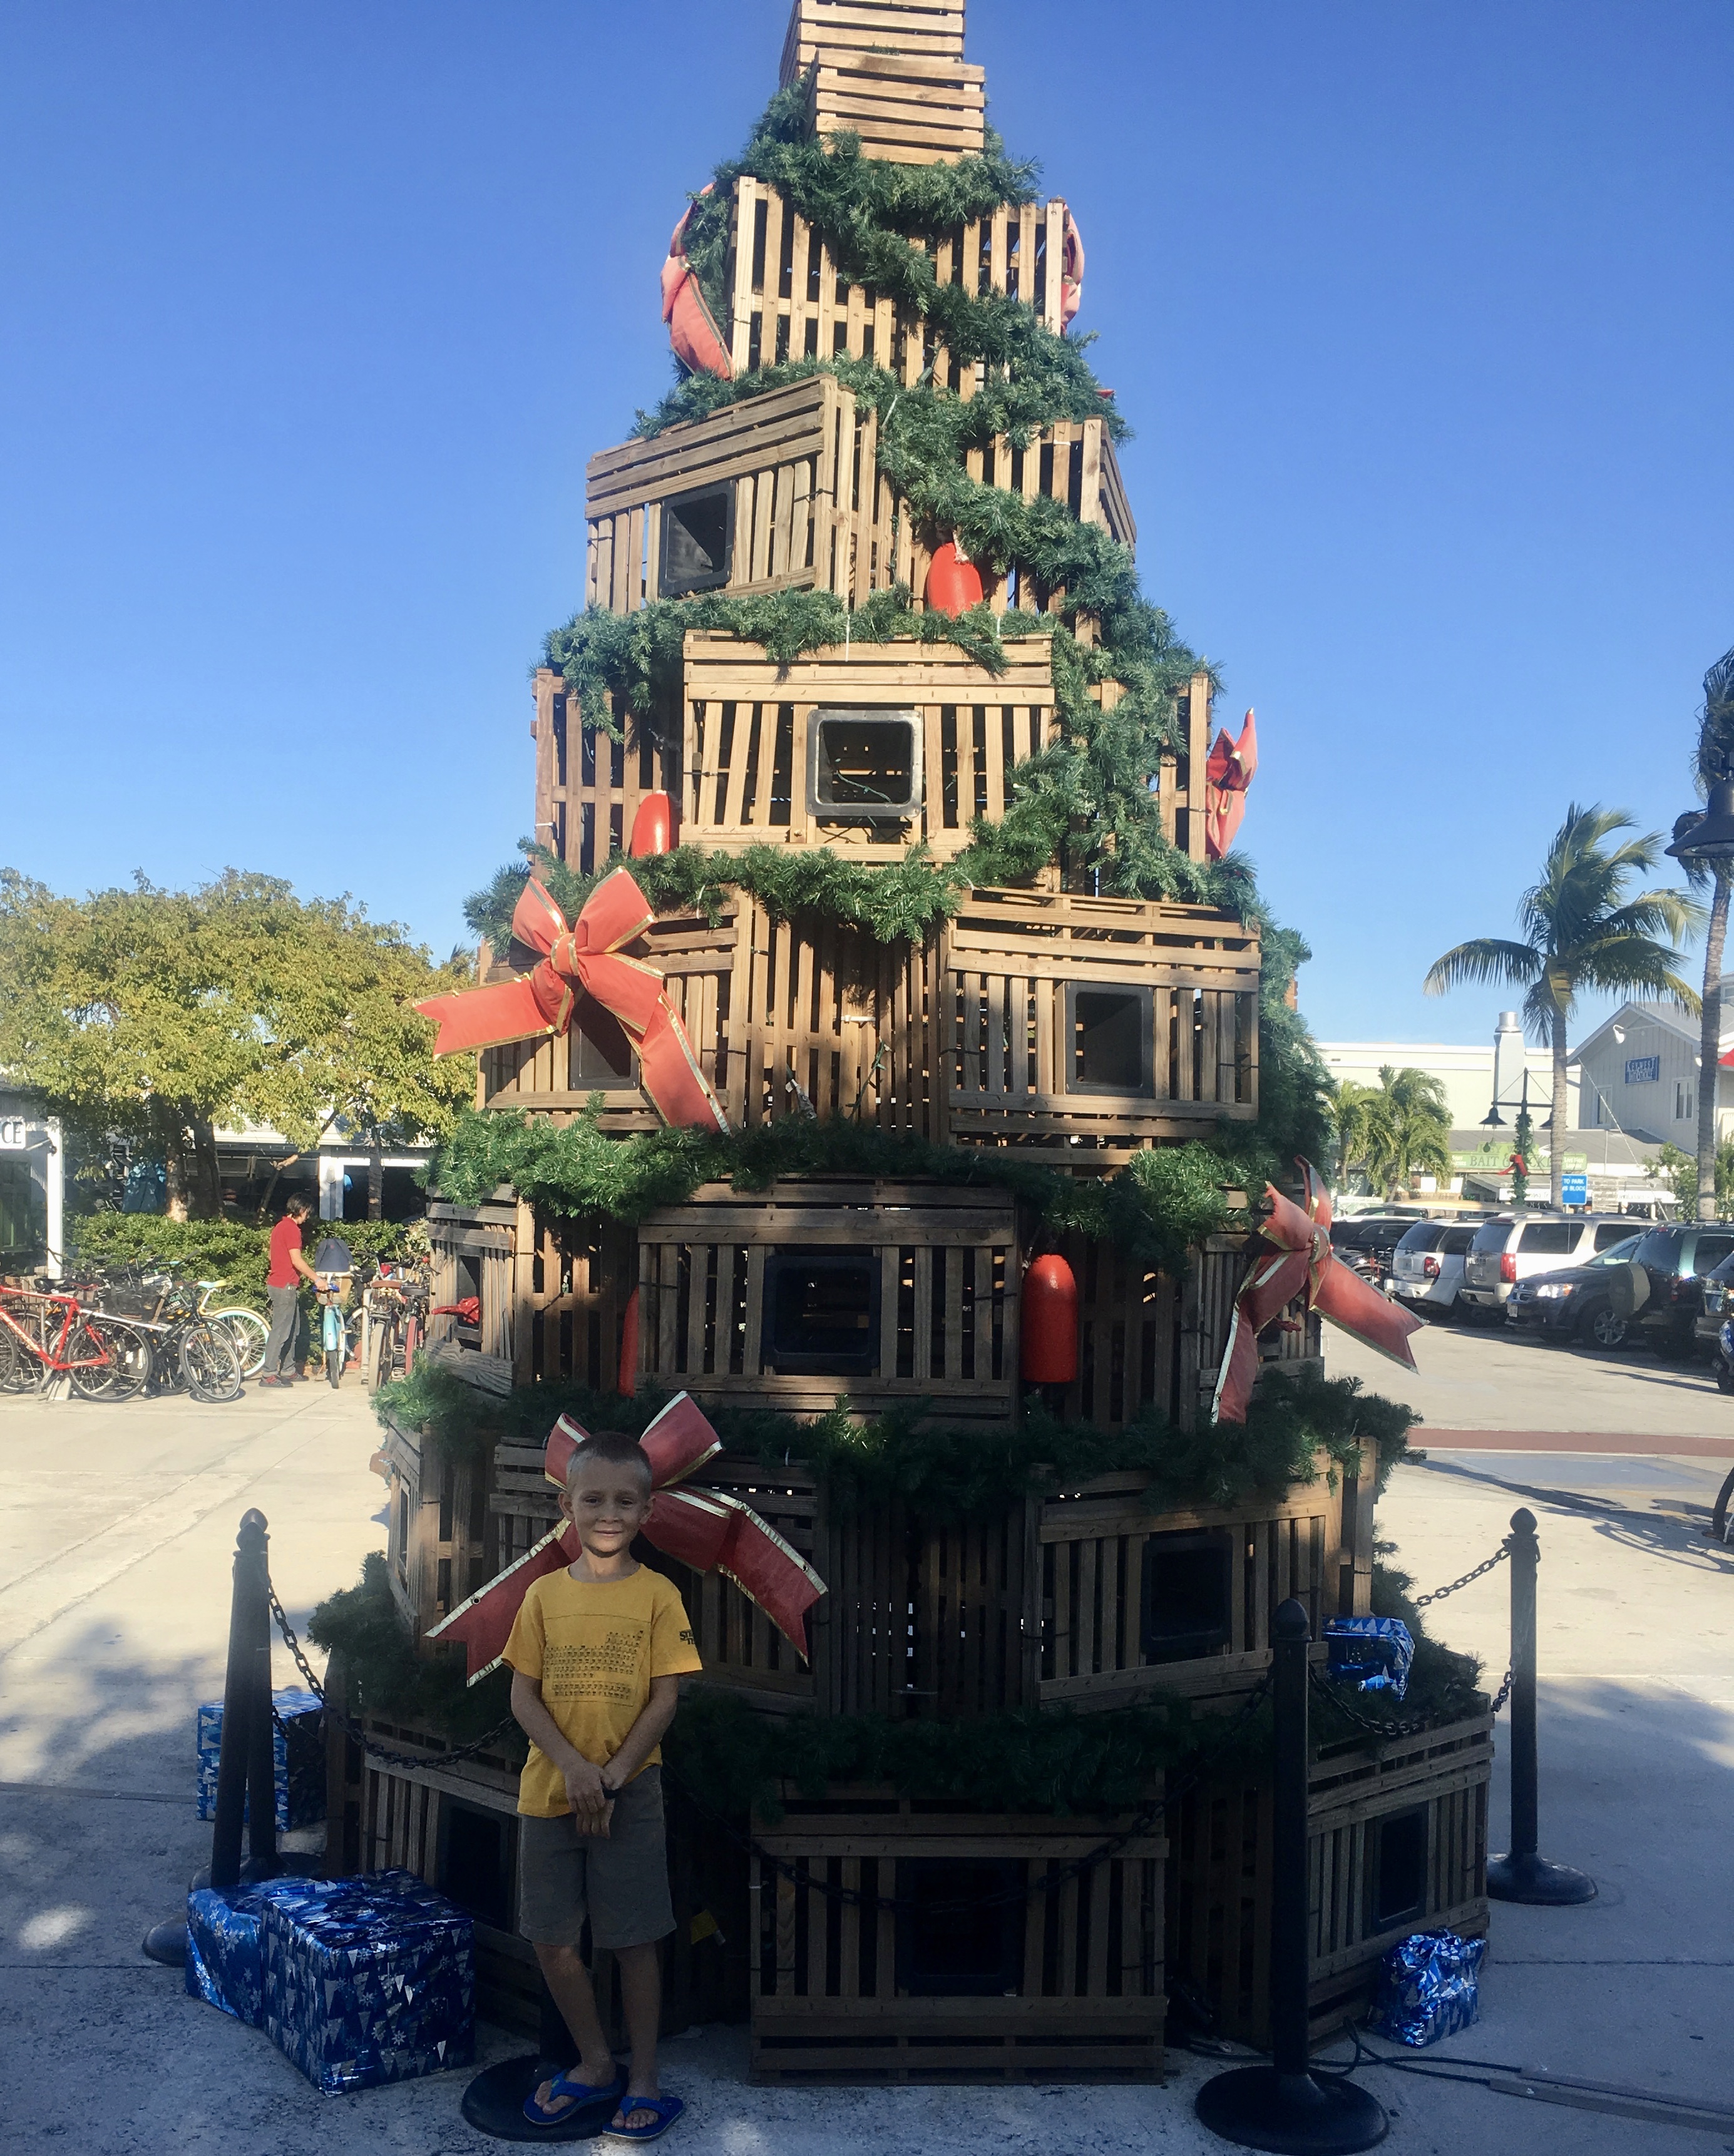 My son in front of a Christmas tree made from stacked lobster traps in Key West, Florida.